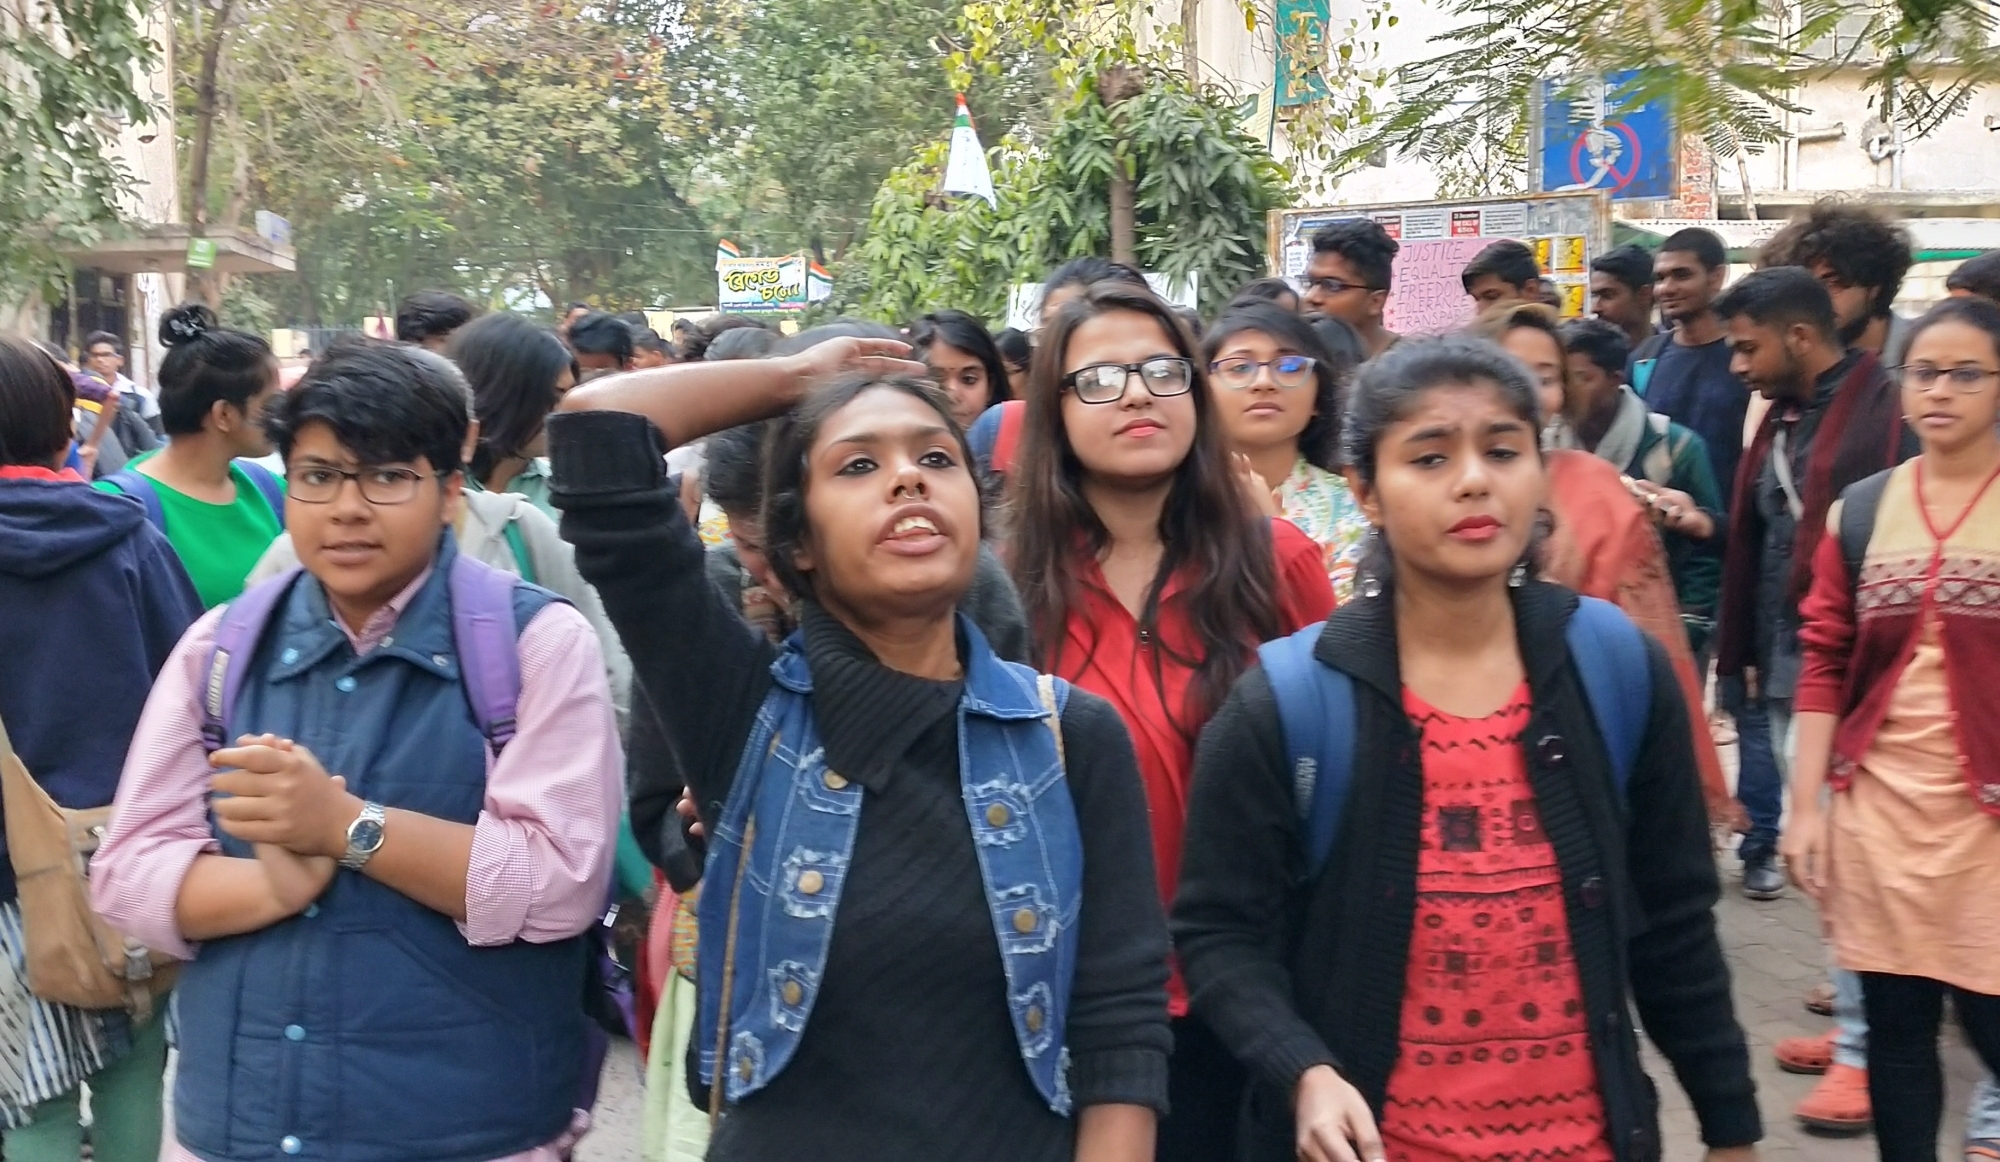 India wants US to release students detained in university fraud at the earliest